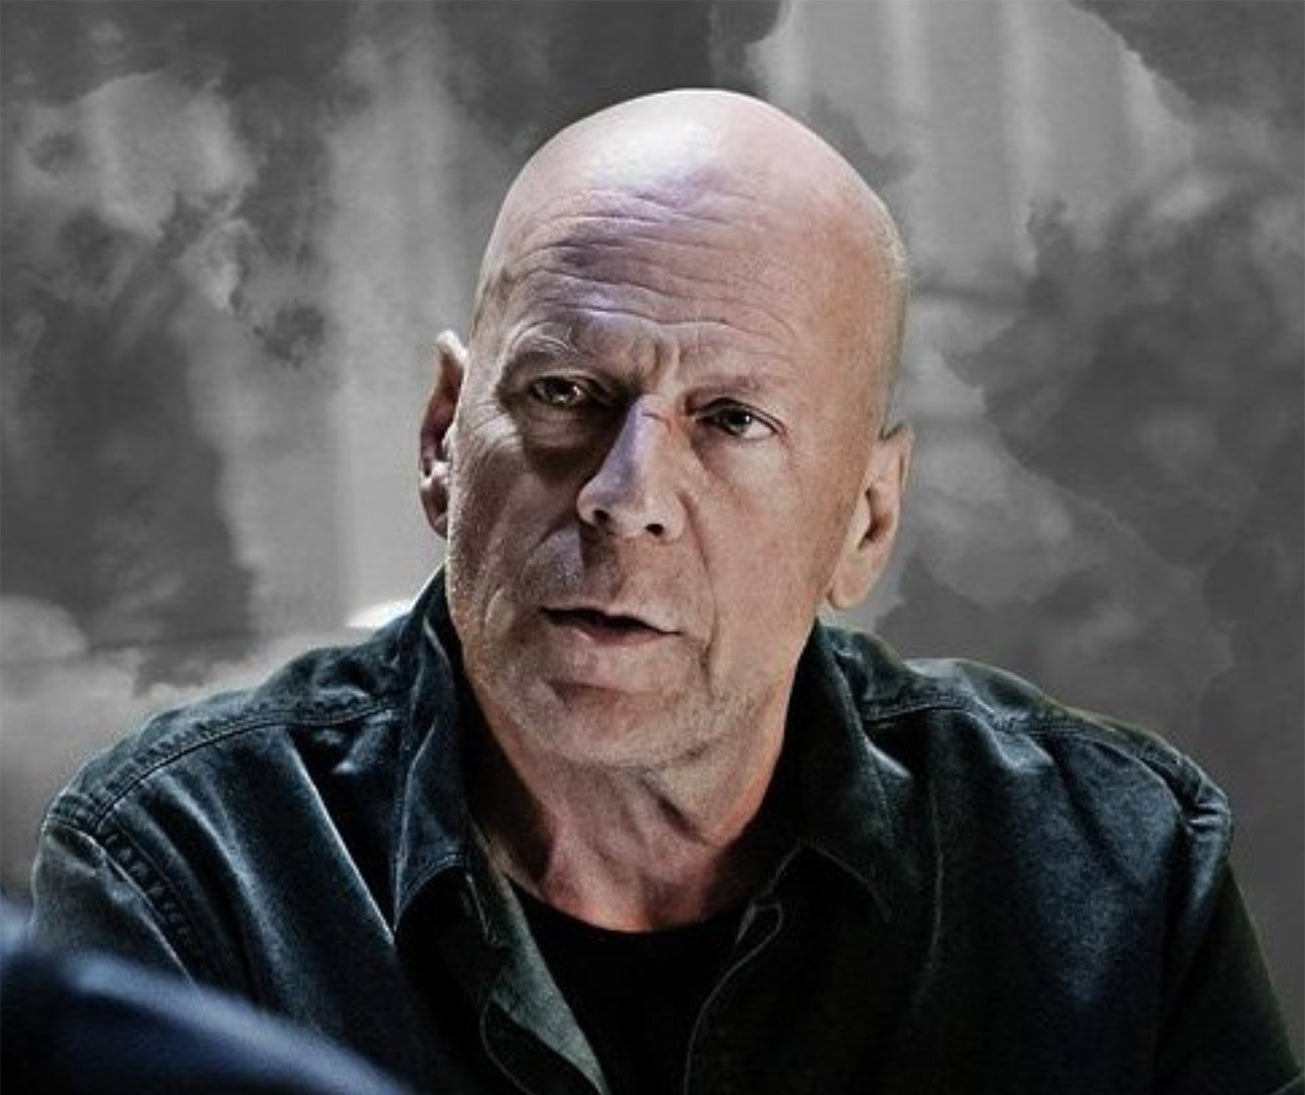 Bruce Willis Is Ending Acting Career Due To Aphasia Diagnosis - DSF Antique Jewelry